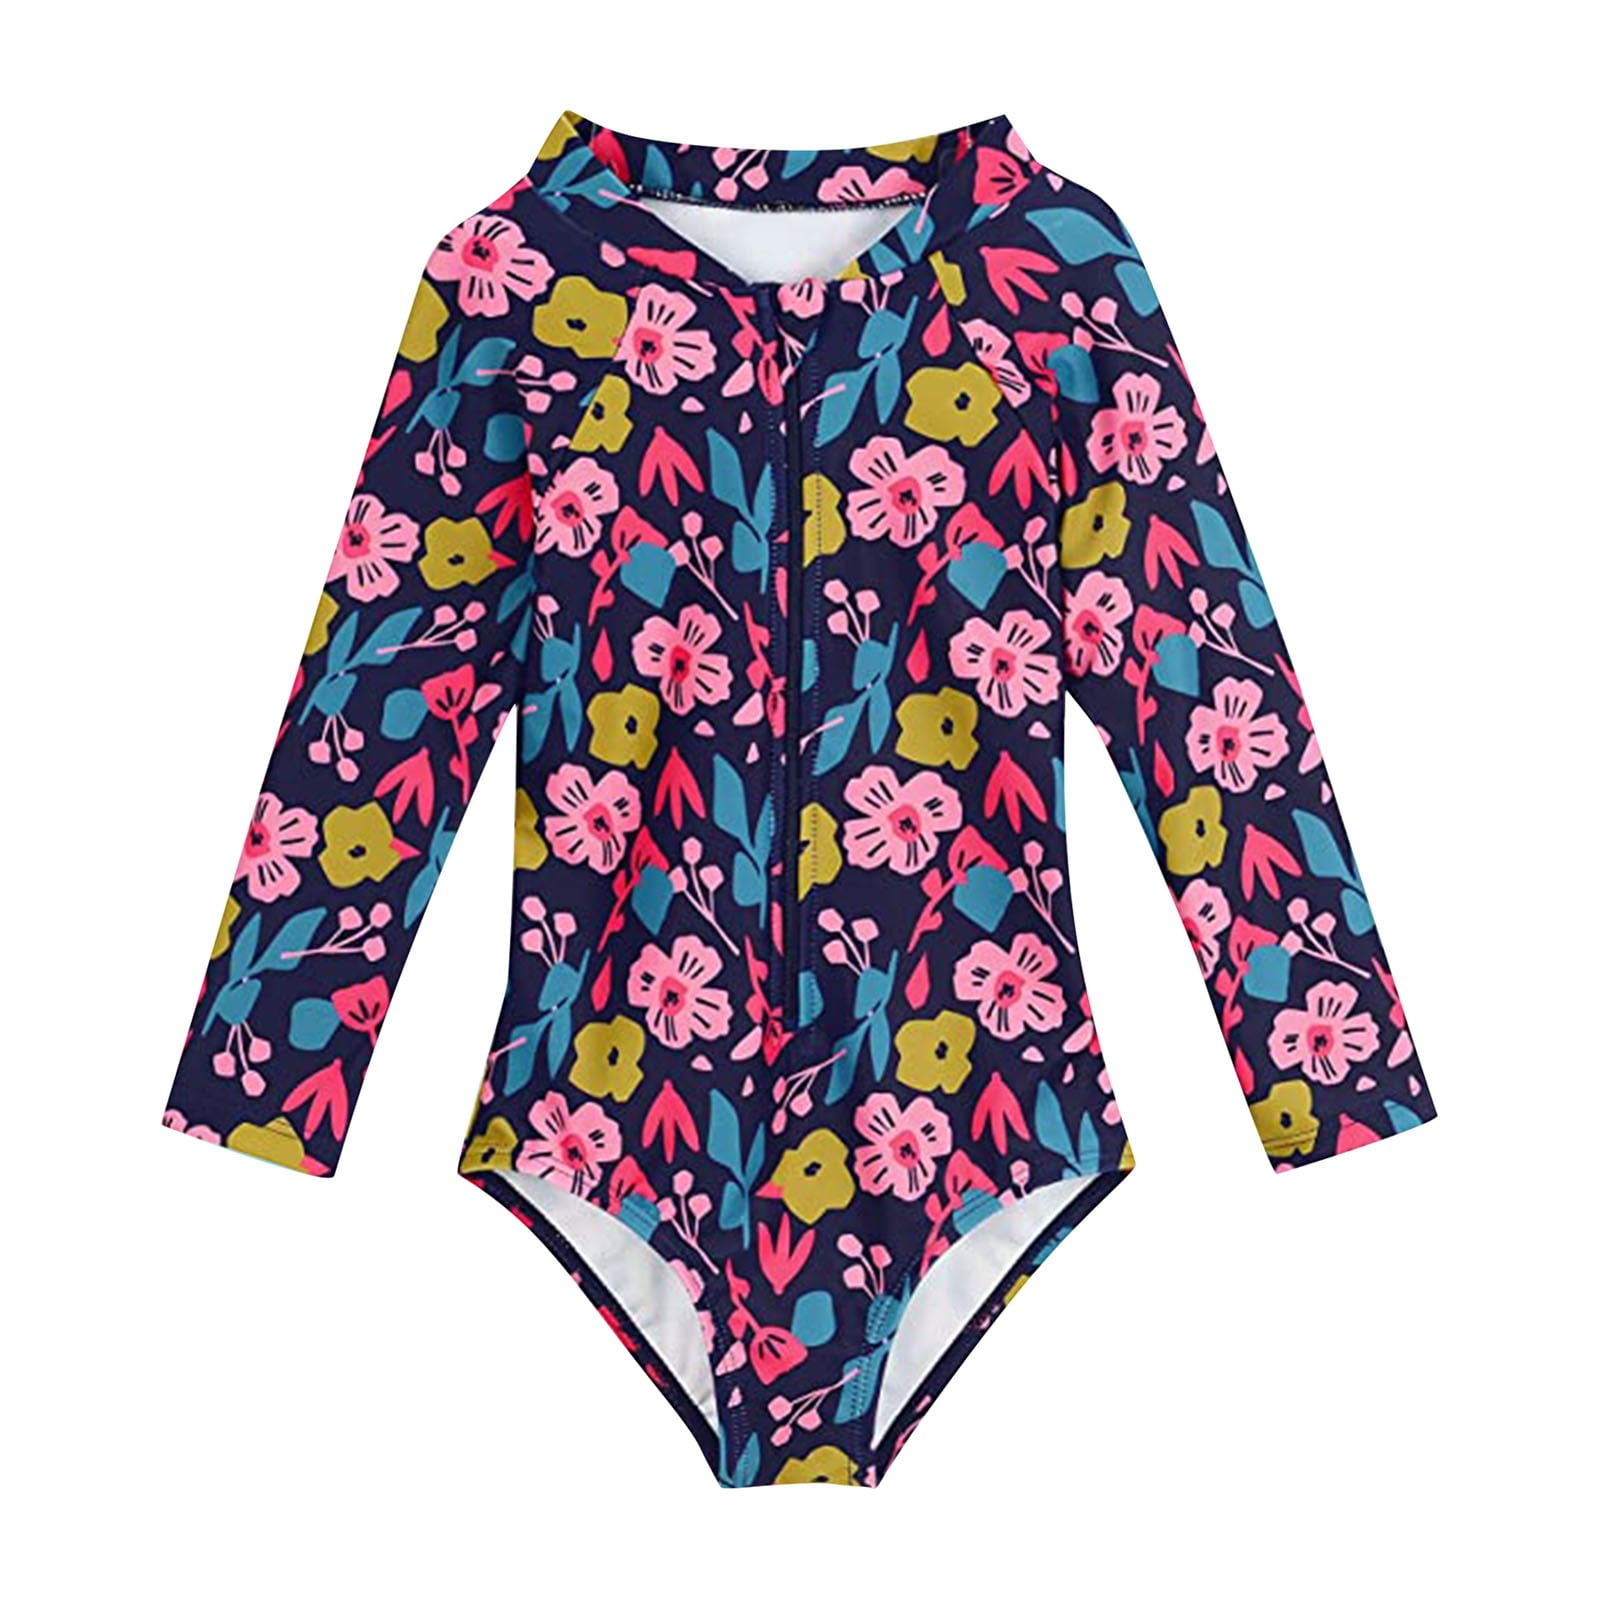 Girls Swimsuit Size 8 Baby and Toddler Girls Swimsuit Rash Guard Long ...